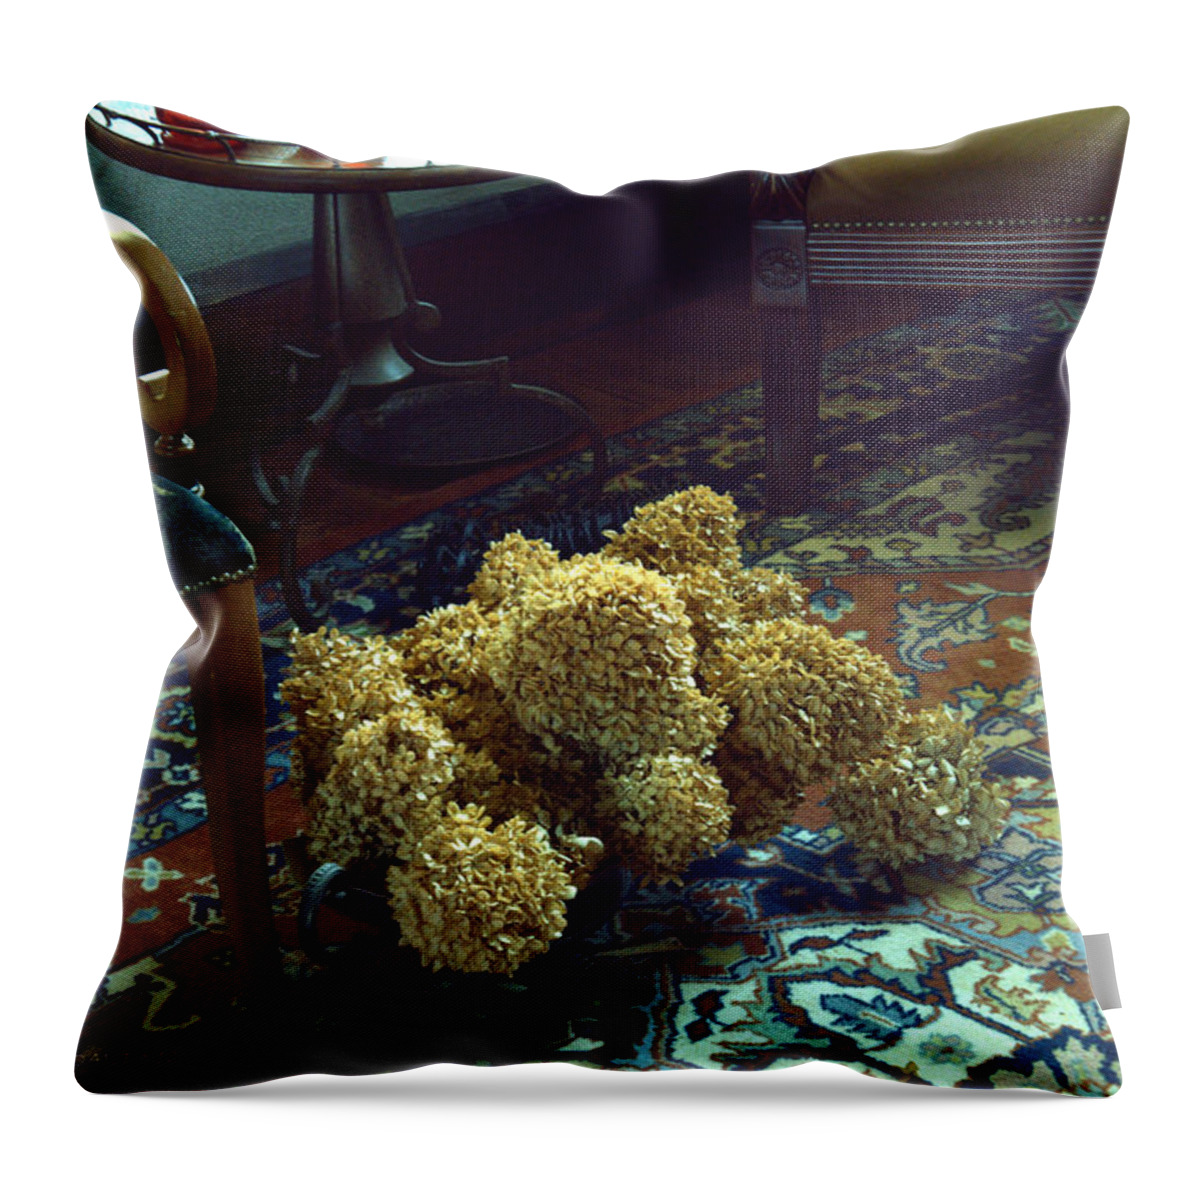 Dried Flowers Throw Pillow featuring the photograph Still Life Comfort by Kathy Barney